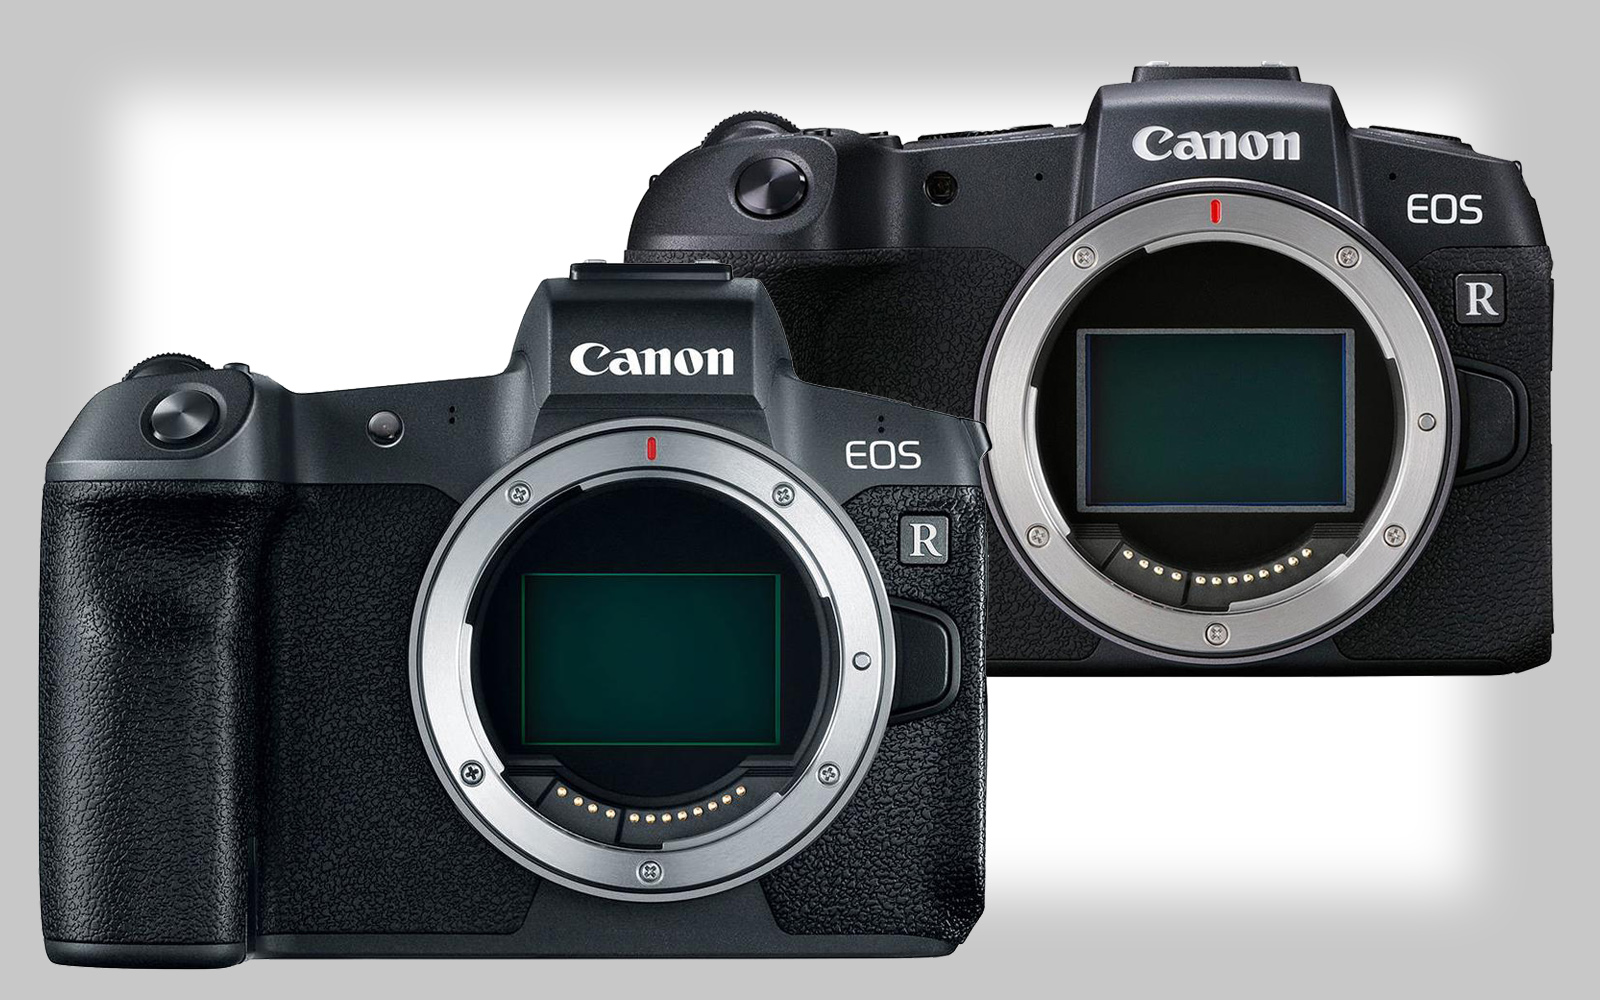 Canons Q2 2019 Financial Report Shows Steep Decline in Camera Sales